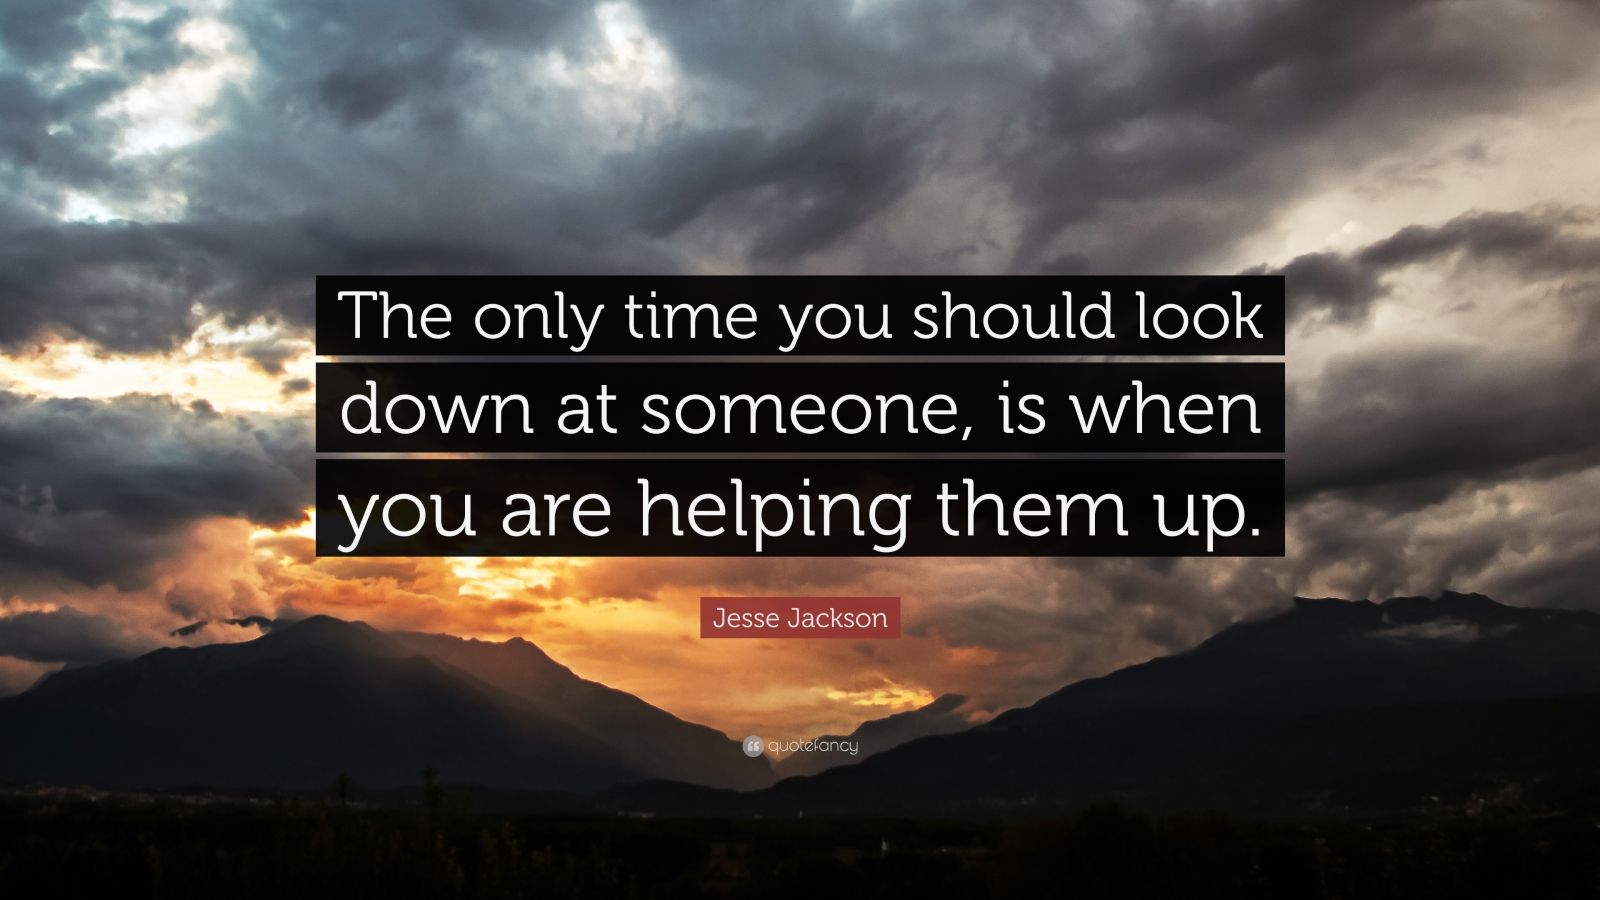 Jesse Jackson Quote: “The only time you should look down at someone, is